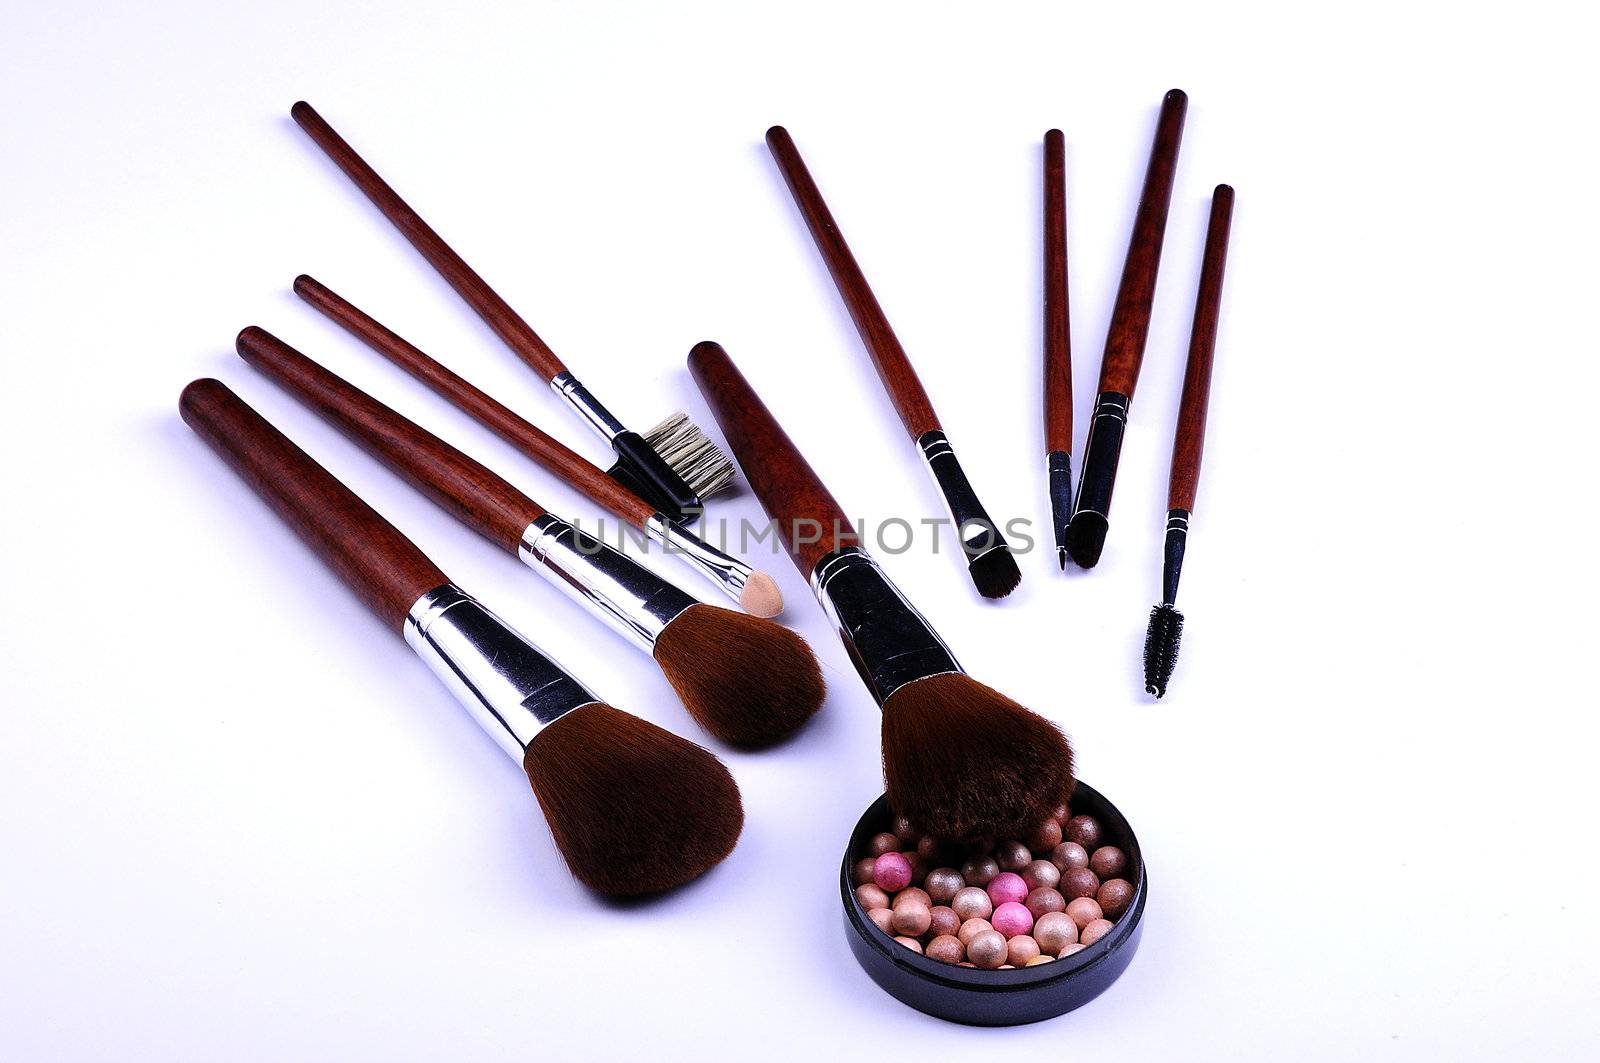 cosmetic tools by dundersztyc